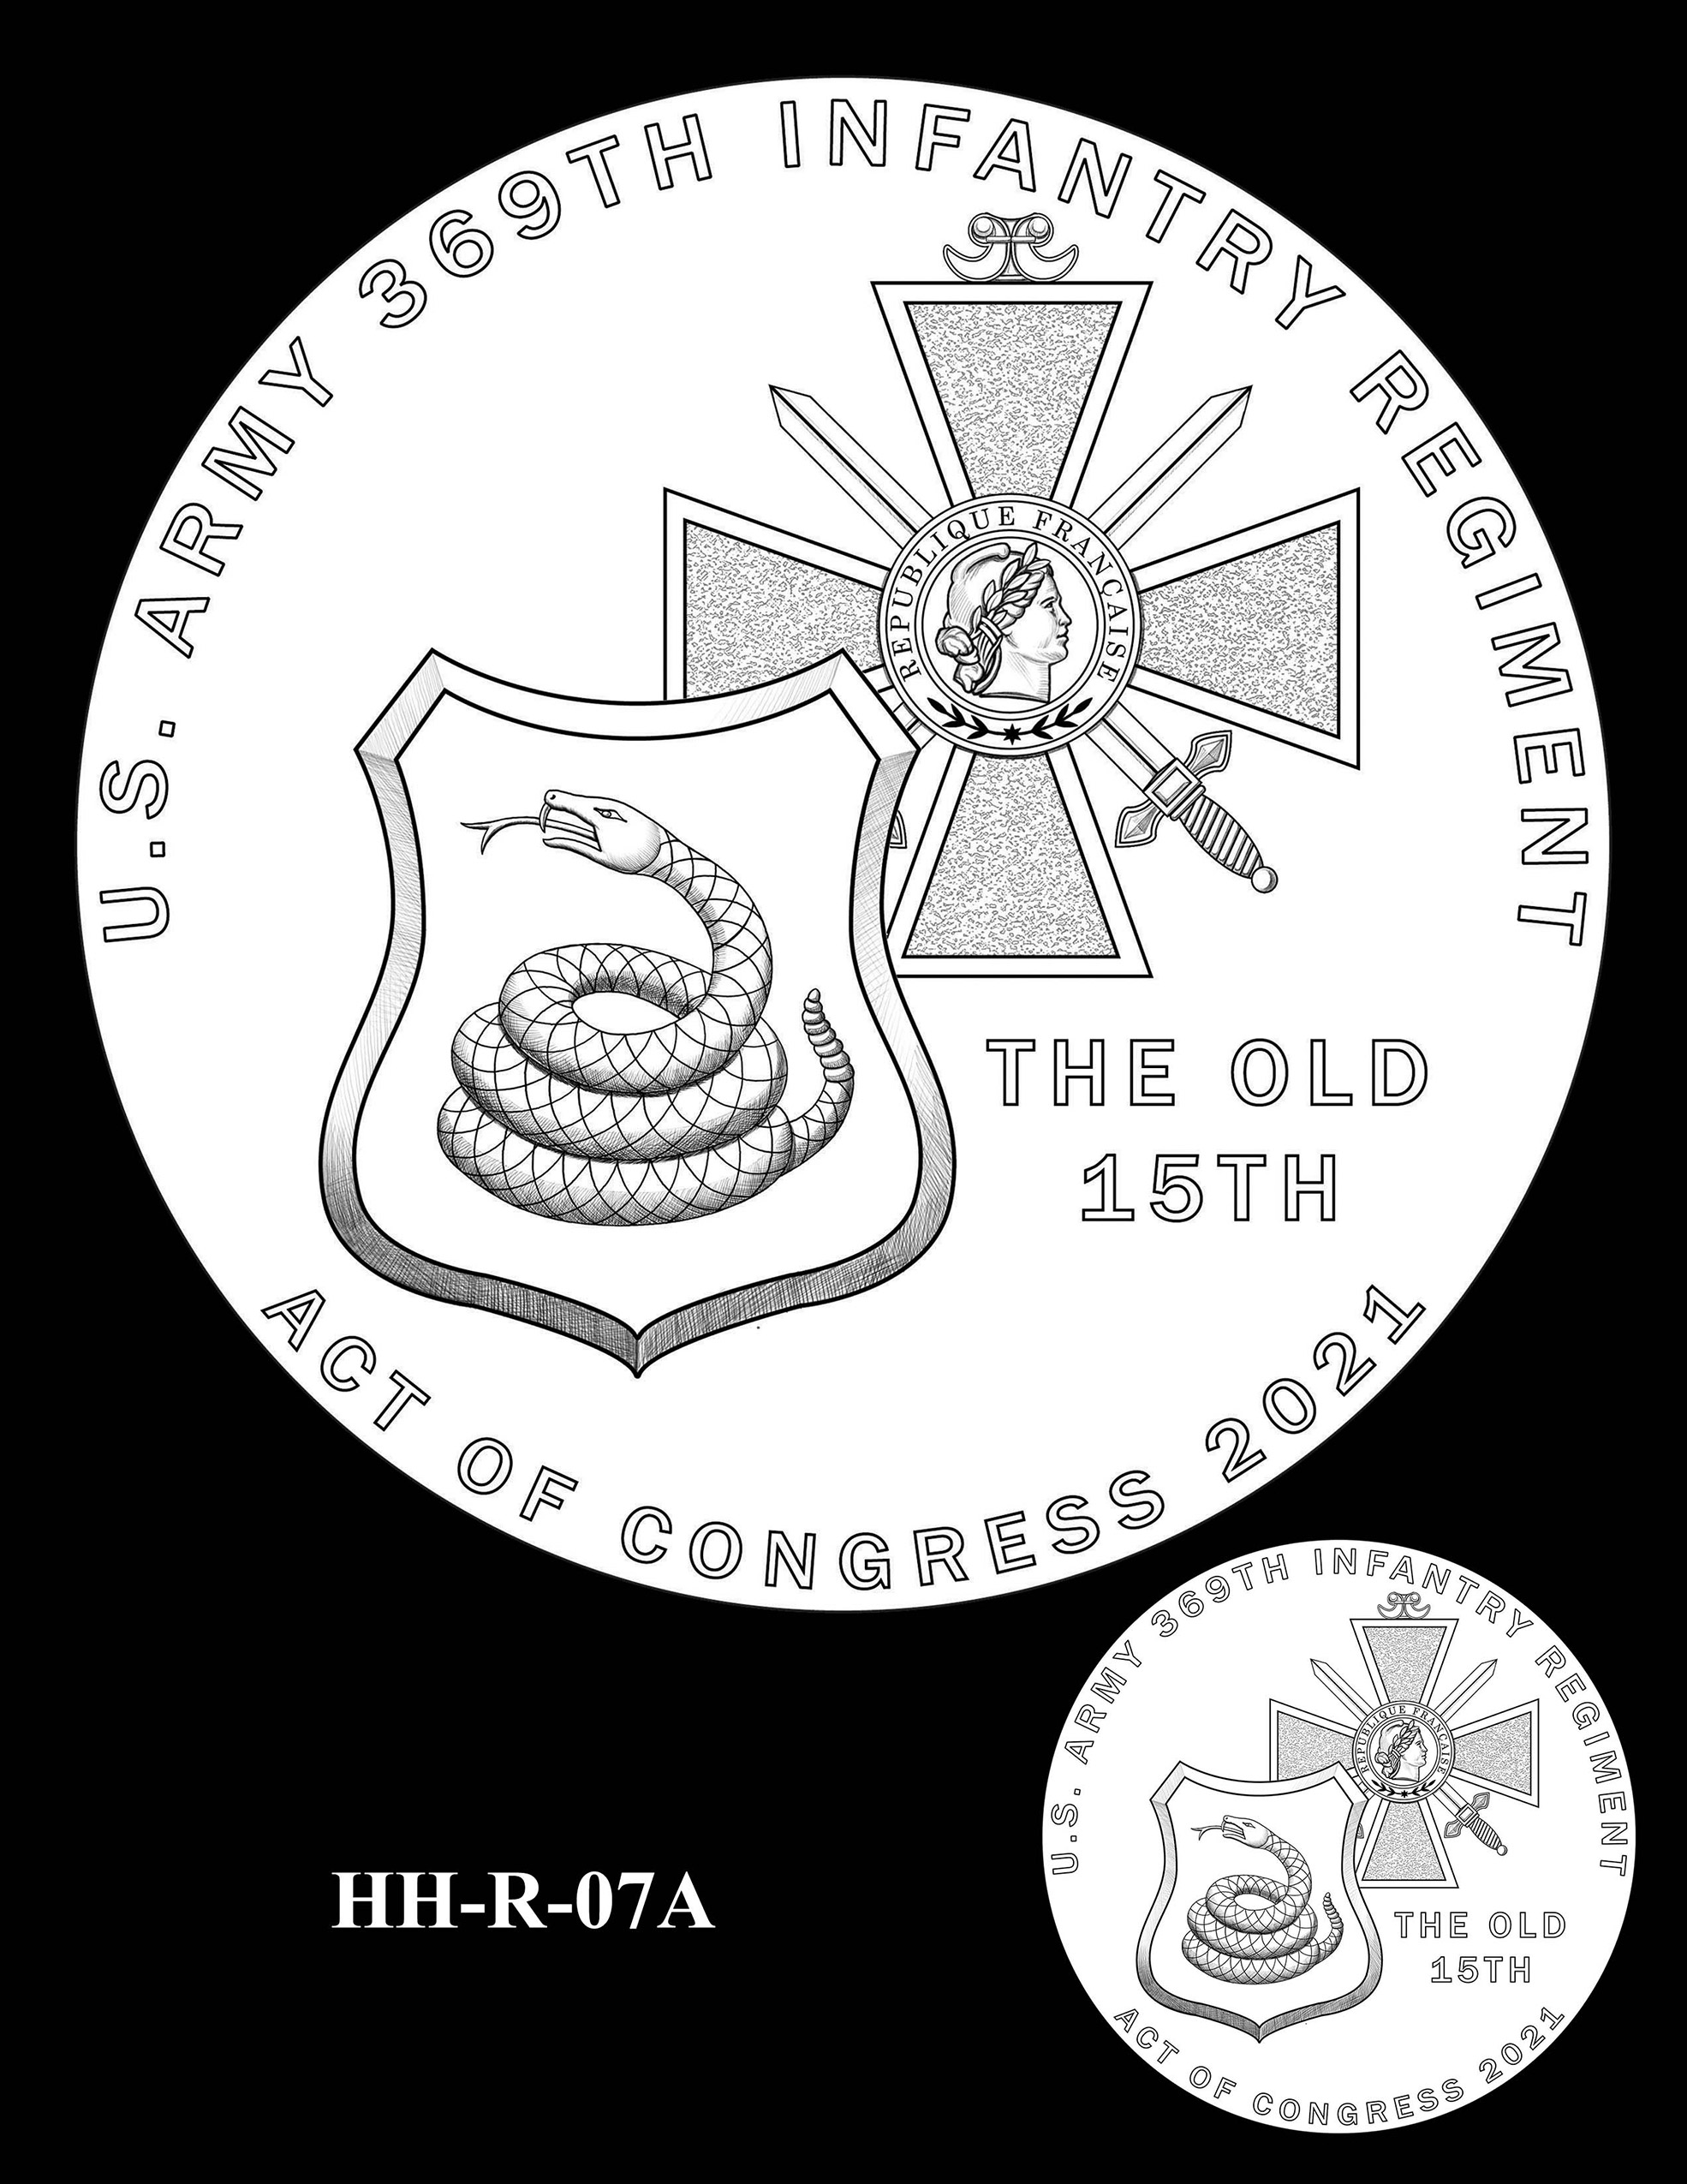 HH-R-07A -- Harlem Hellfighters Congressional Gold Medal